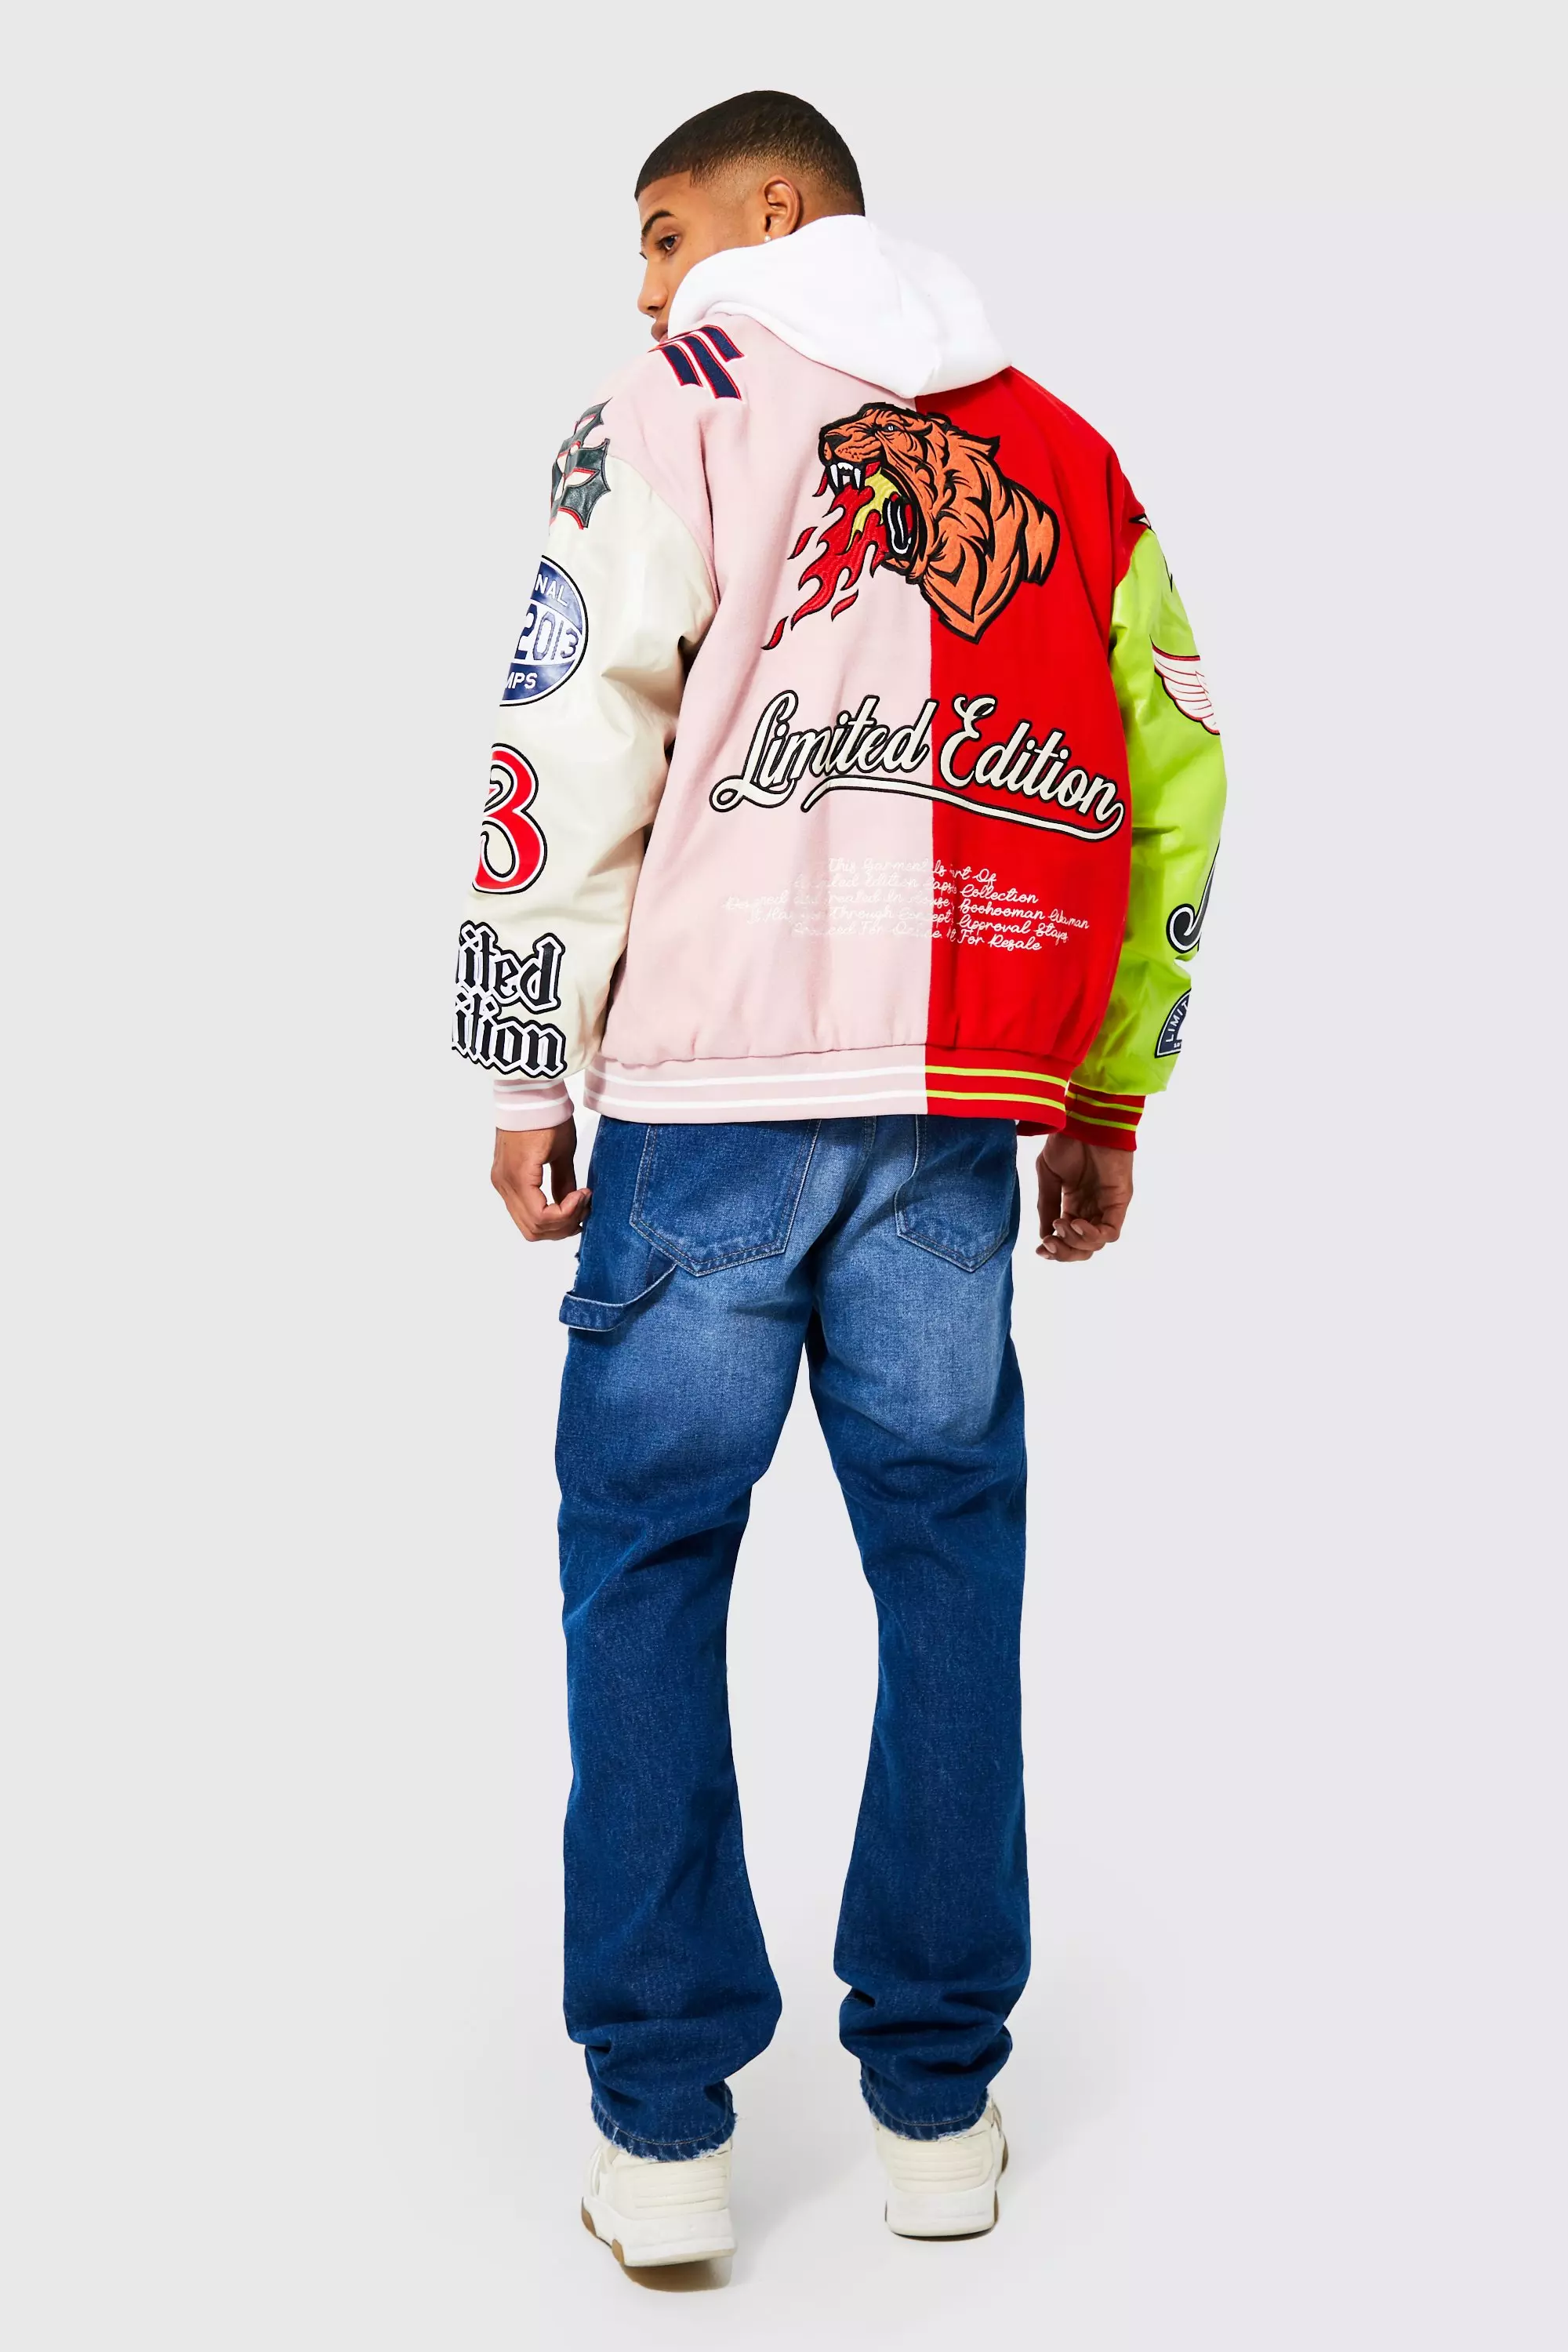 MULTI PATCHES MIXED LEATHER VARSITY BLOUSON Jacket Arms With Bouclette  Embroidered Patches Jackets Men Women Designer Striped Wool Ribs On From  Yddseven, $102.92